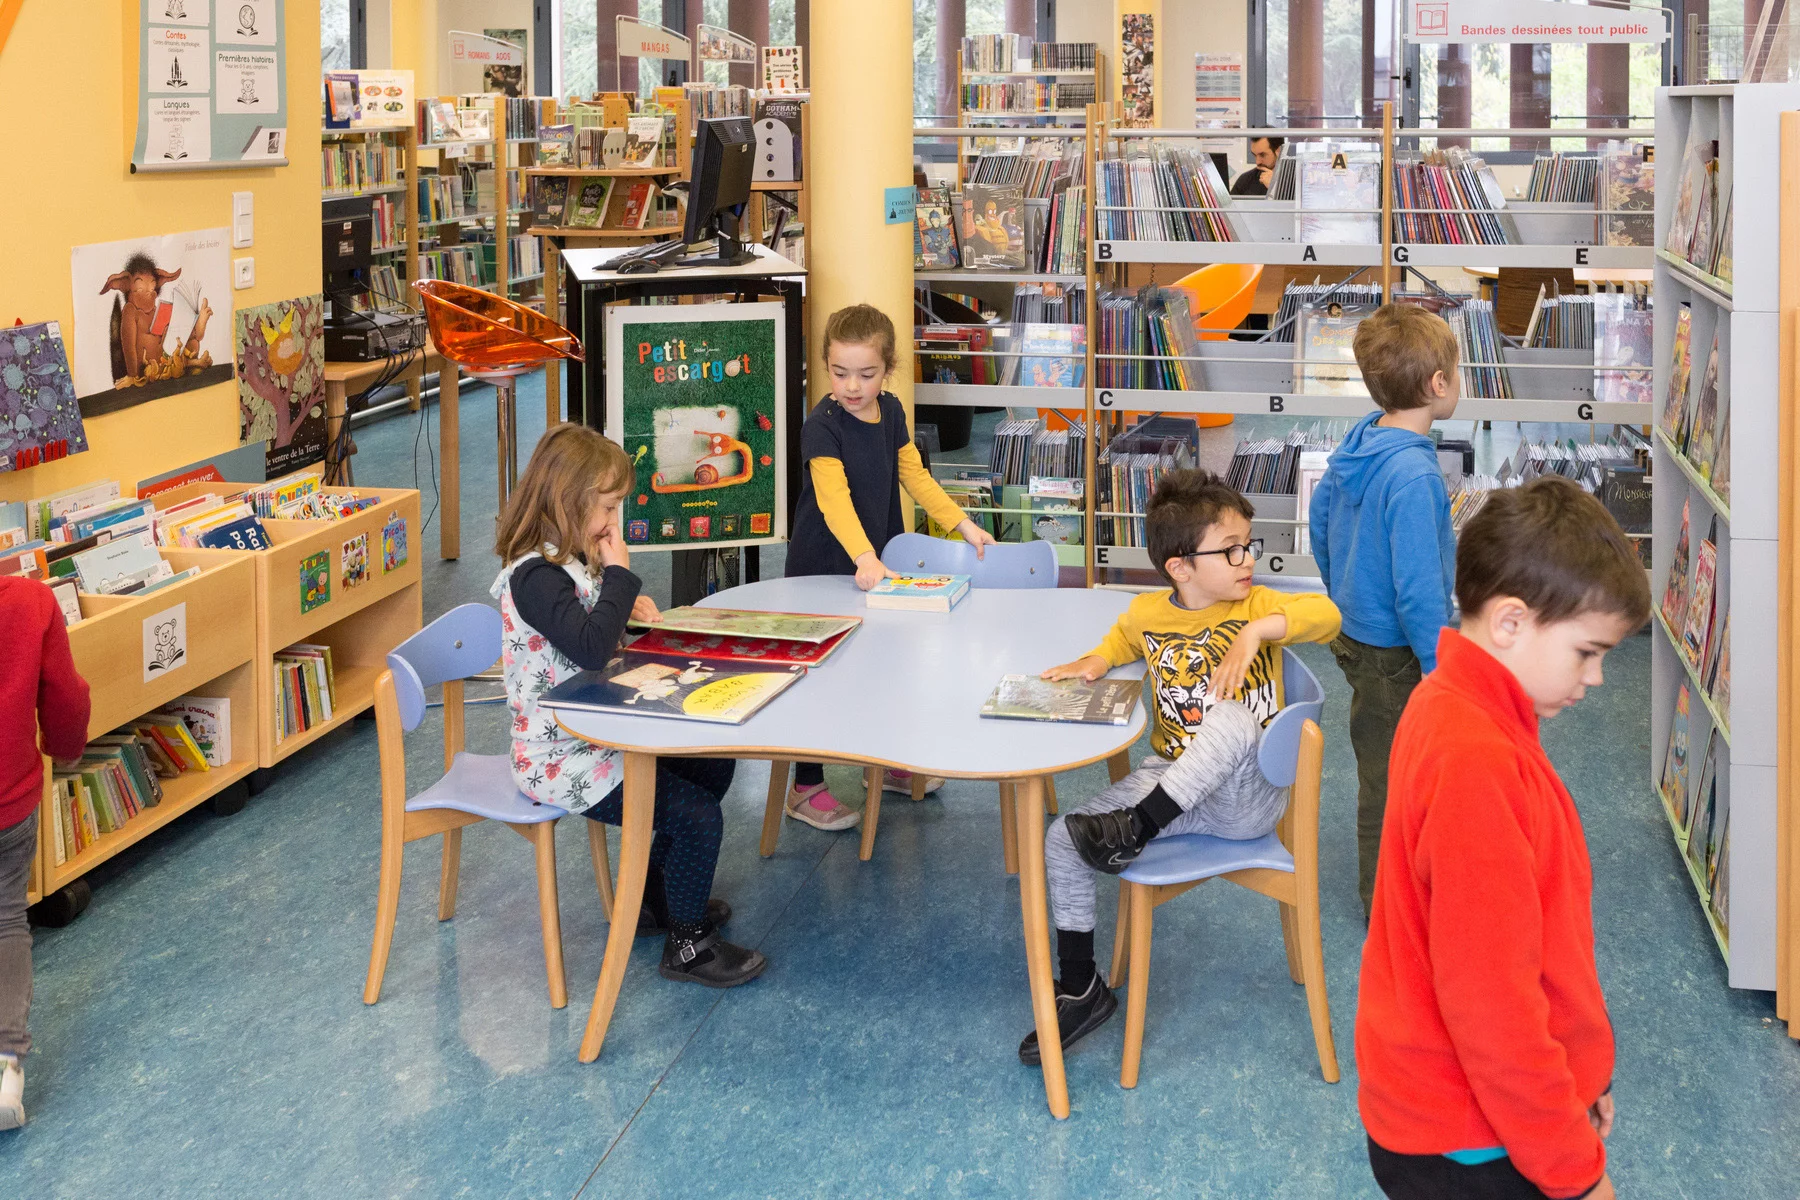 A typical primary school library in France